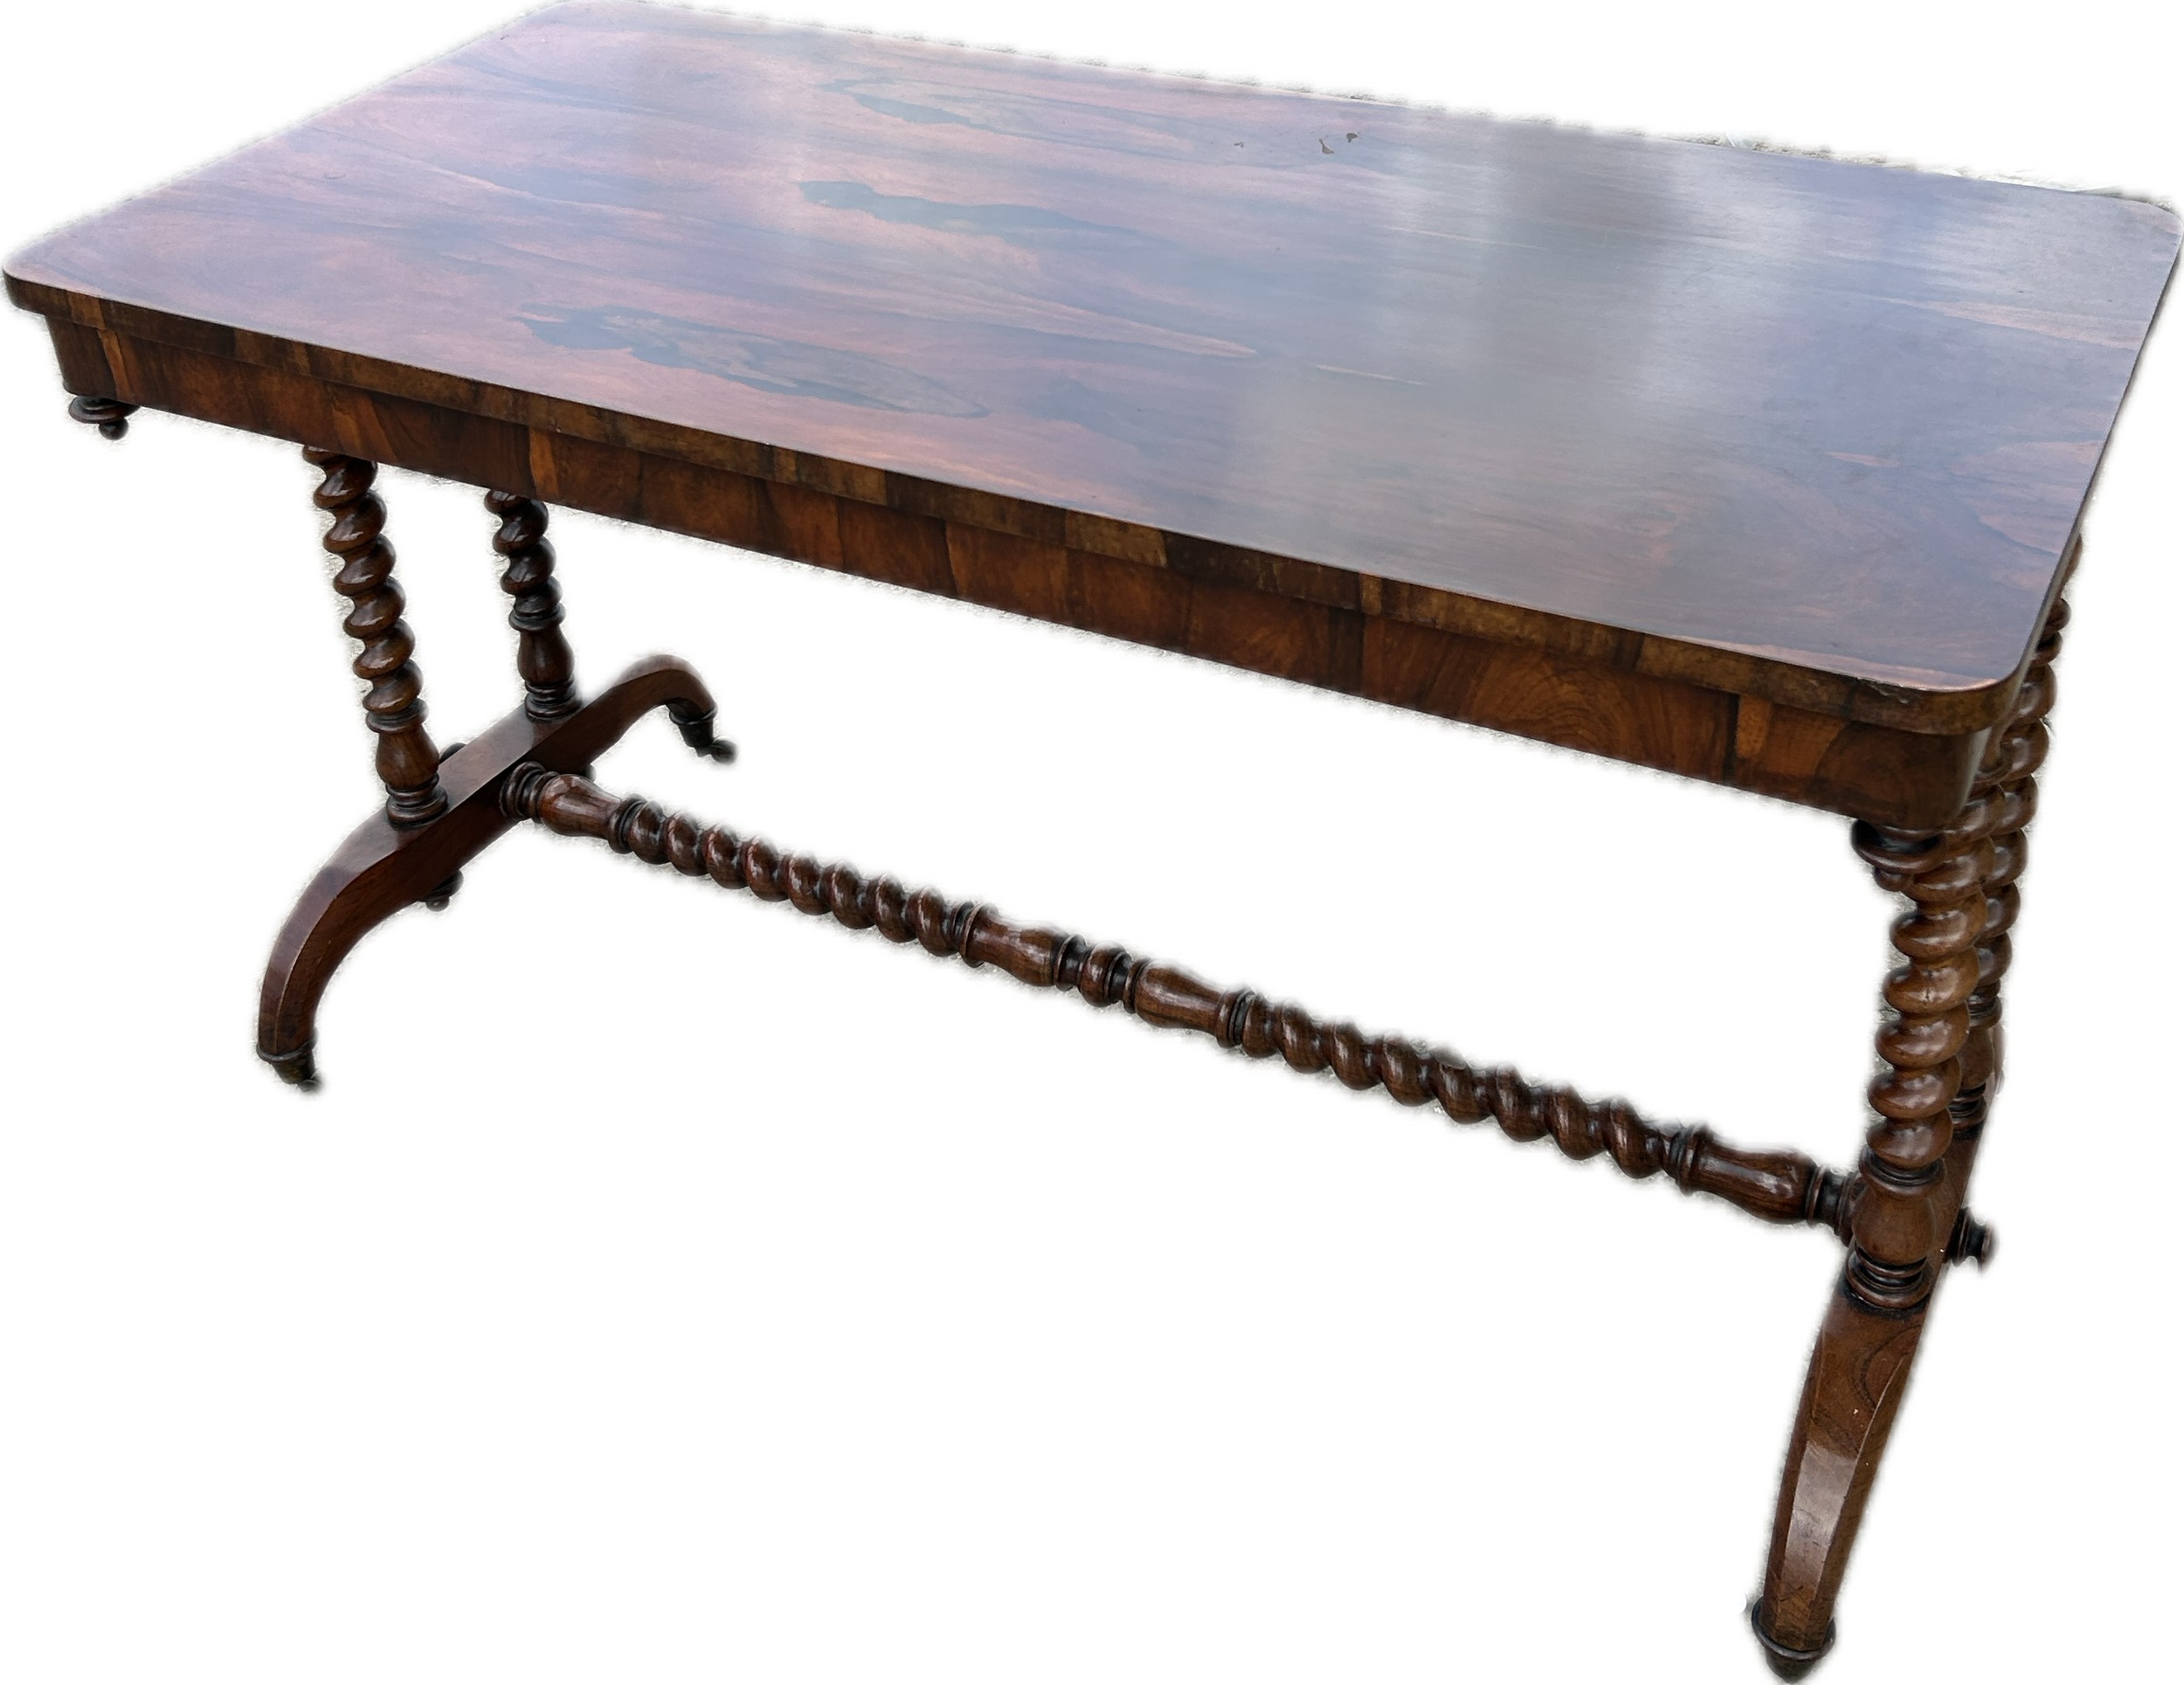 Antique regency rose wood writing table measures approx 28 inches tall 46 inches wide 24 inches - Image 3 of 3